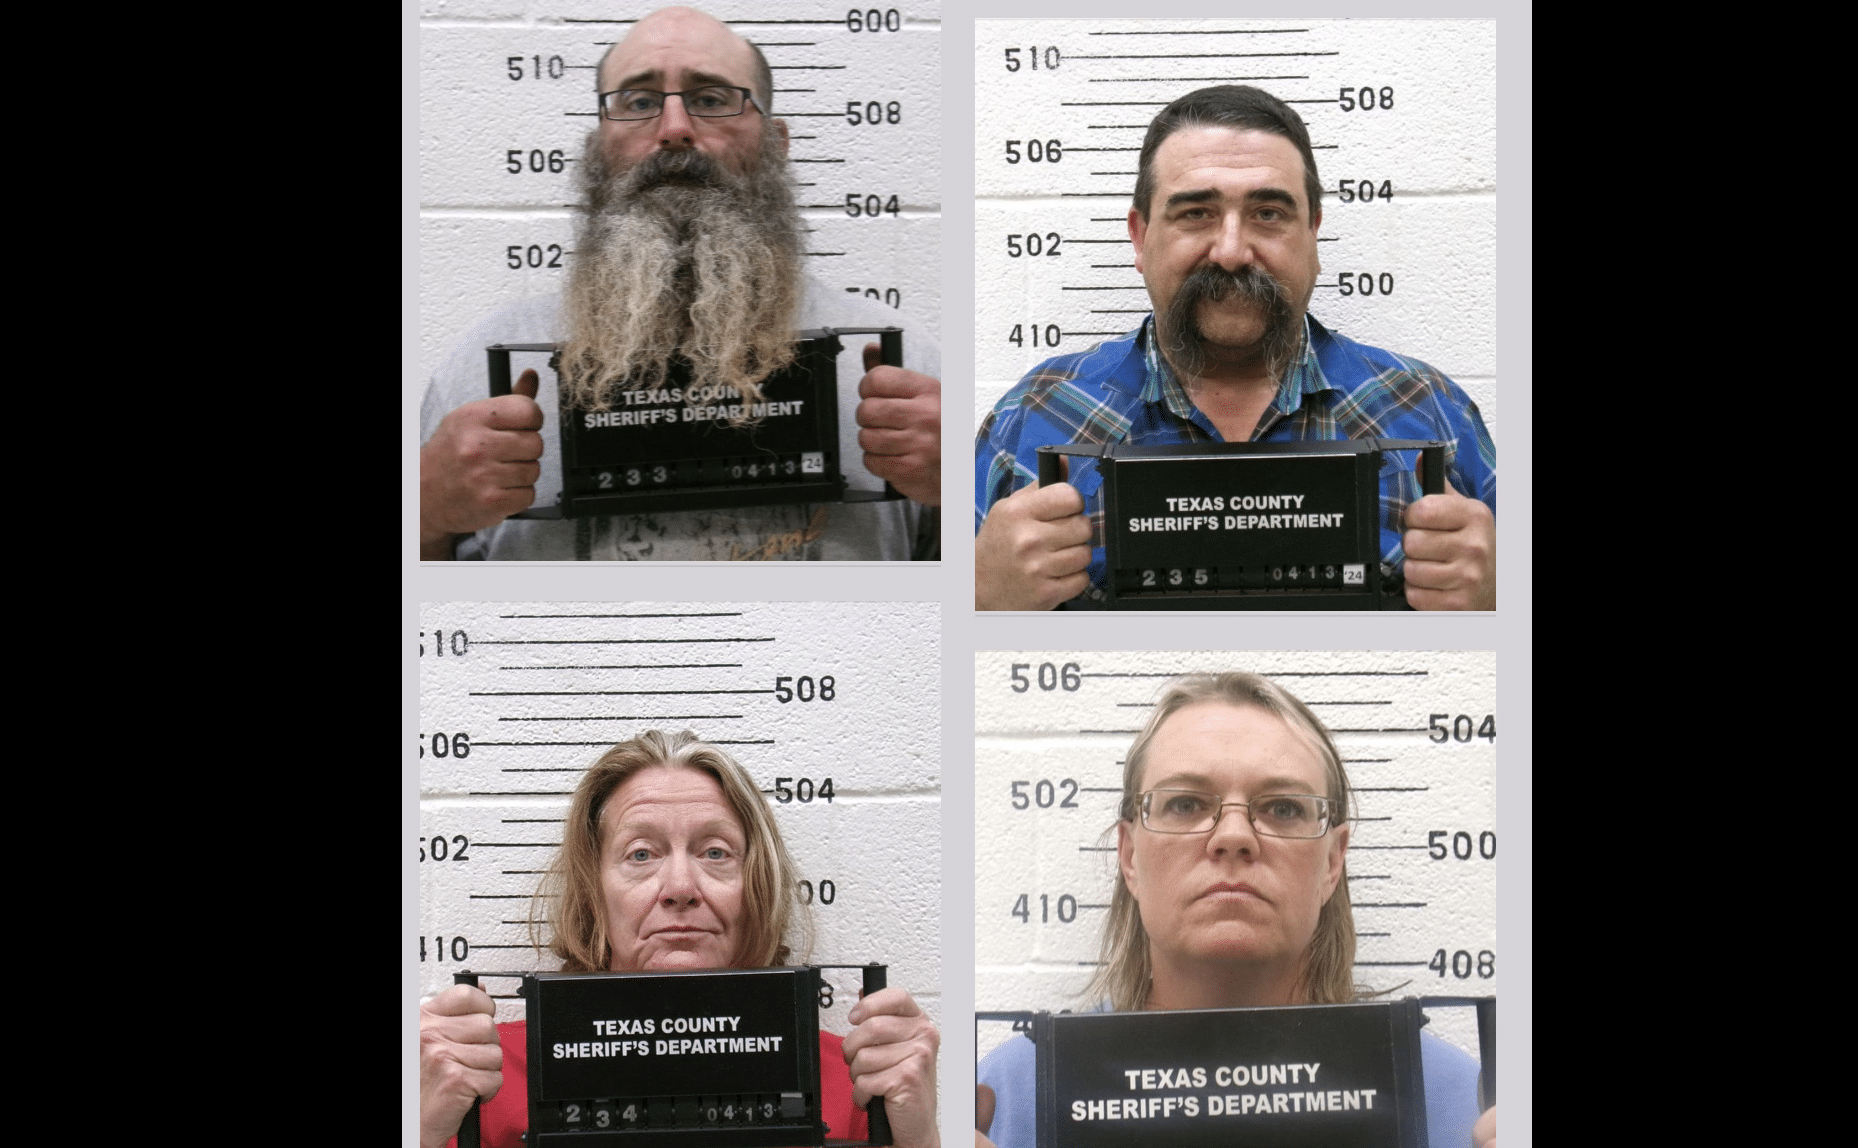 Tad Bert Cullum, 43, Tifany Machel Adams, 54, Cole Earl Twombly, 50, and Cora Twombly, 44 Via Oklahoma State Bureau of Investigation - Authorized Page